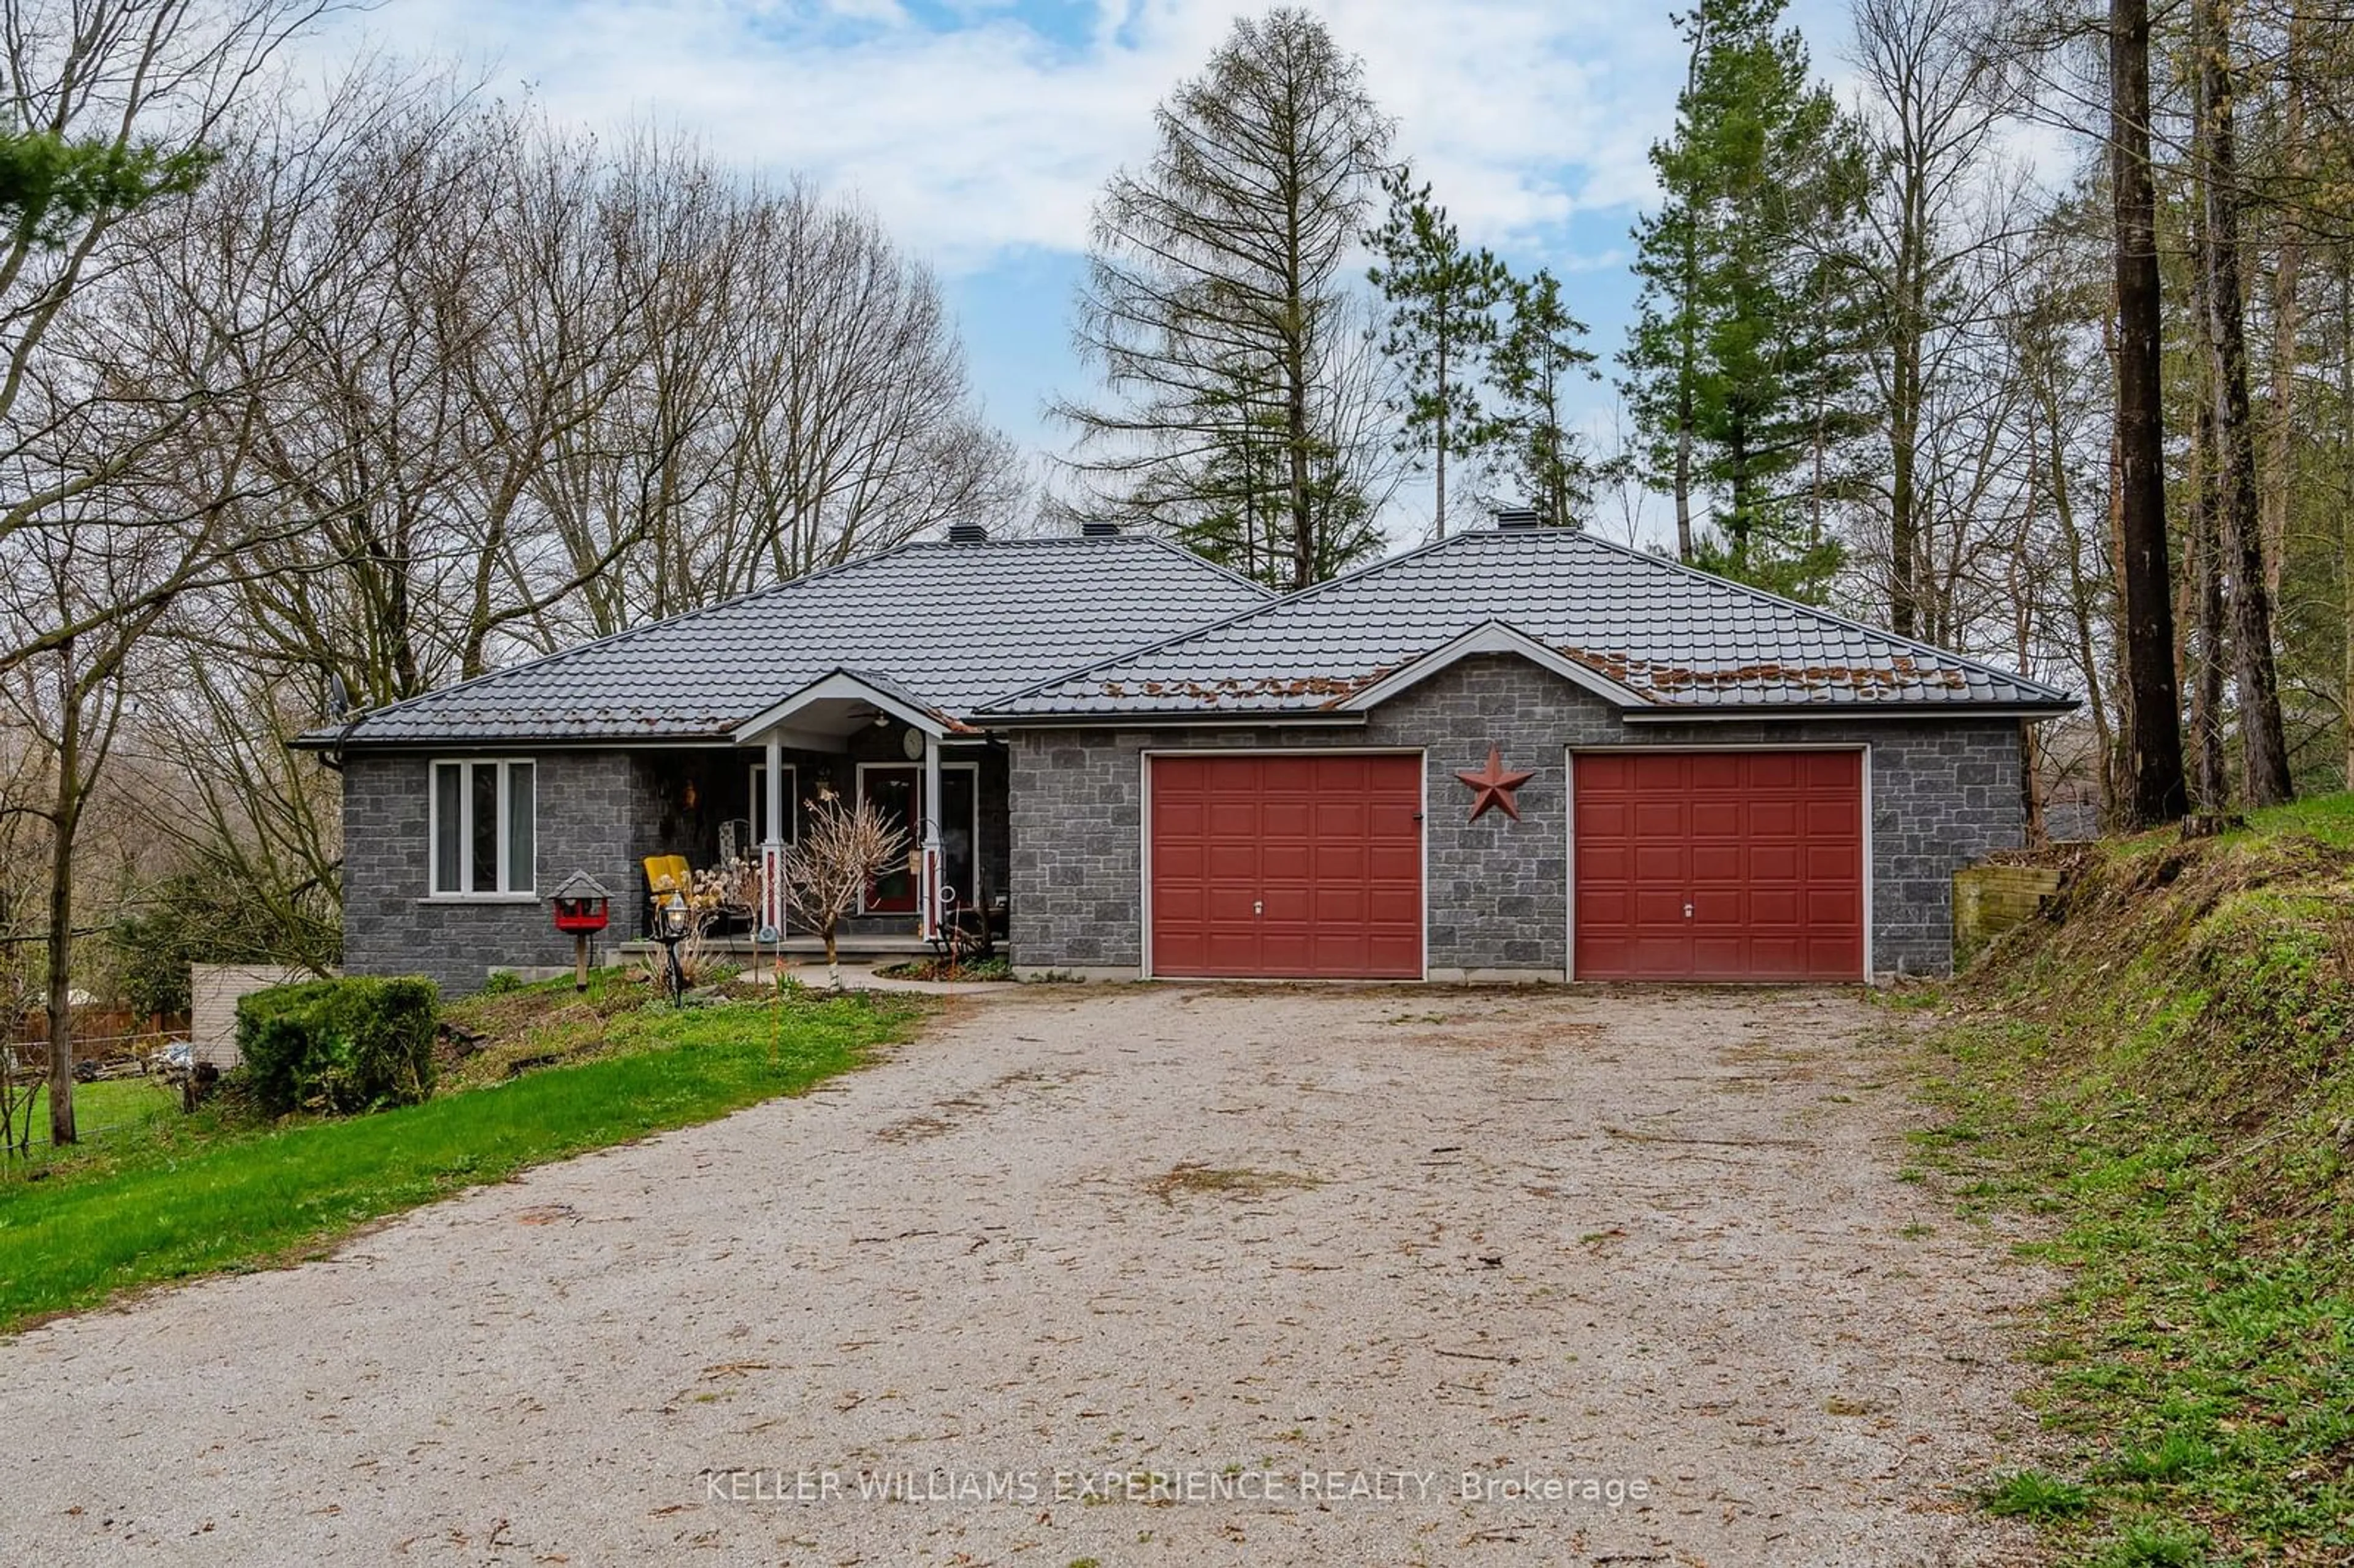 Home with brick exterior material for 13 Albert St, Springwater Ontario L0L 1V0